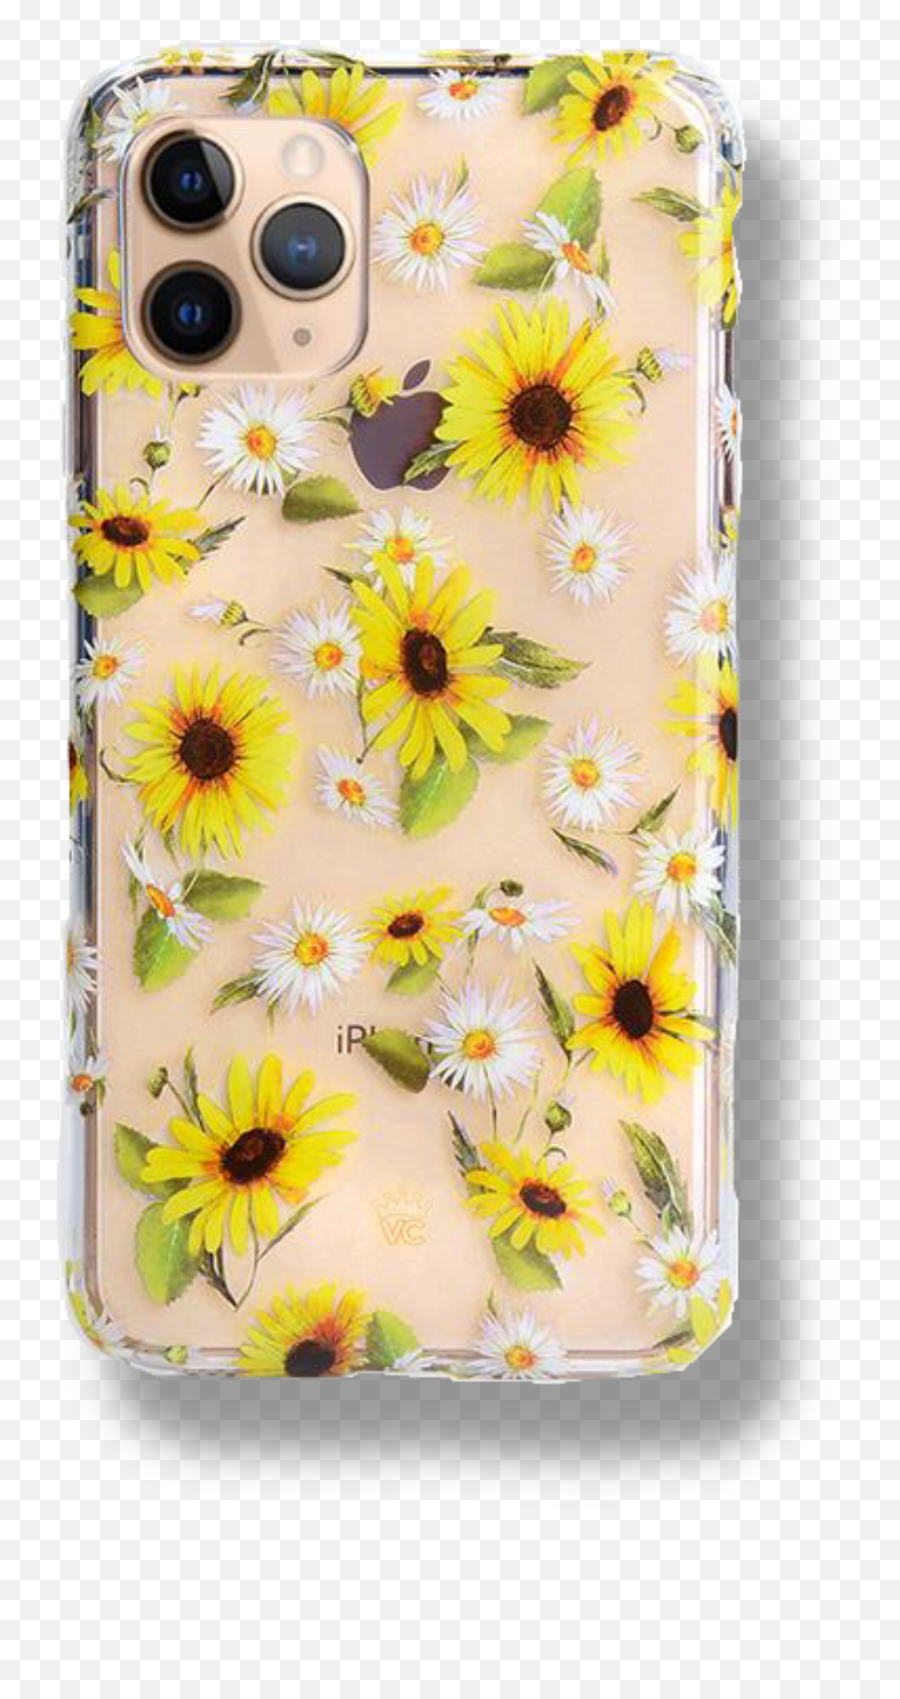 Largest Collection Of Free - Toedit Iphone7 Stickers Yellow Girly Iphone X Case Emoji,Emoji Iphone 4 Case